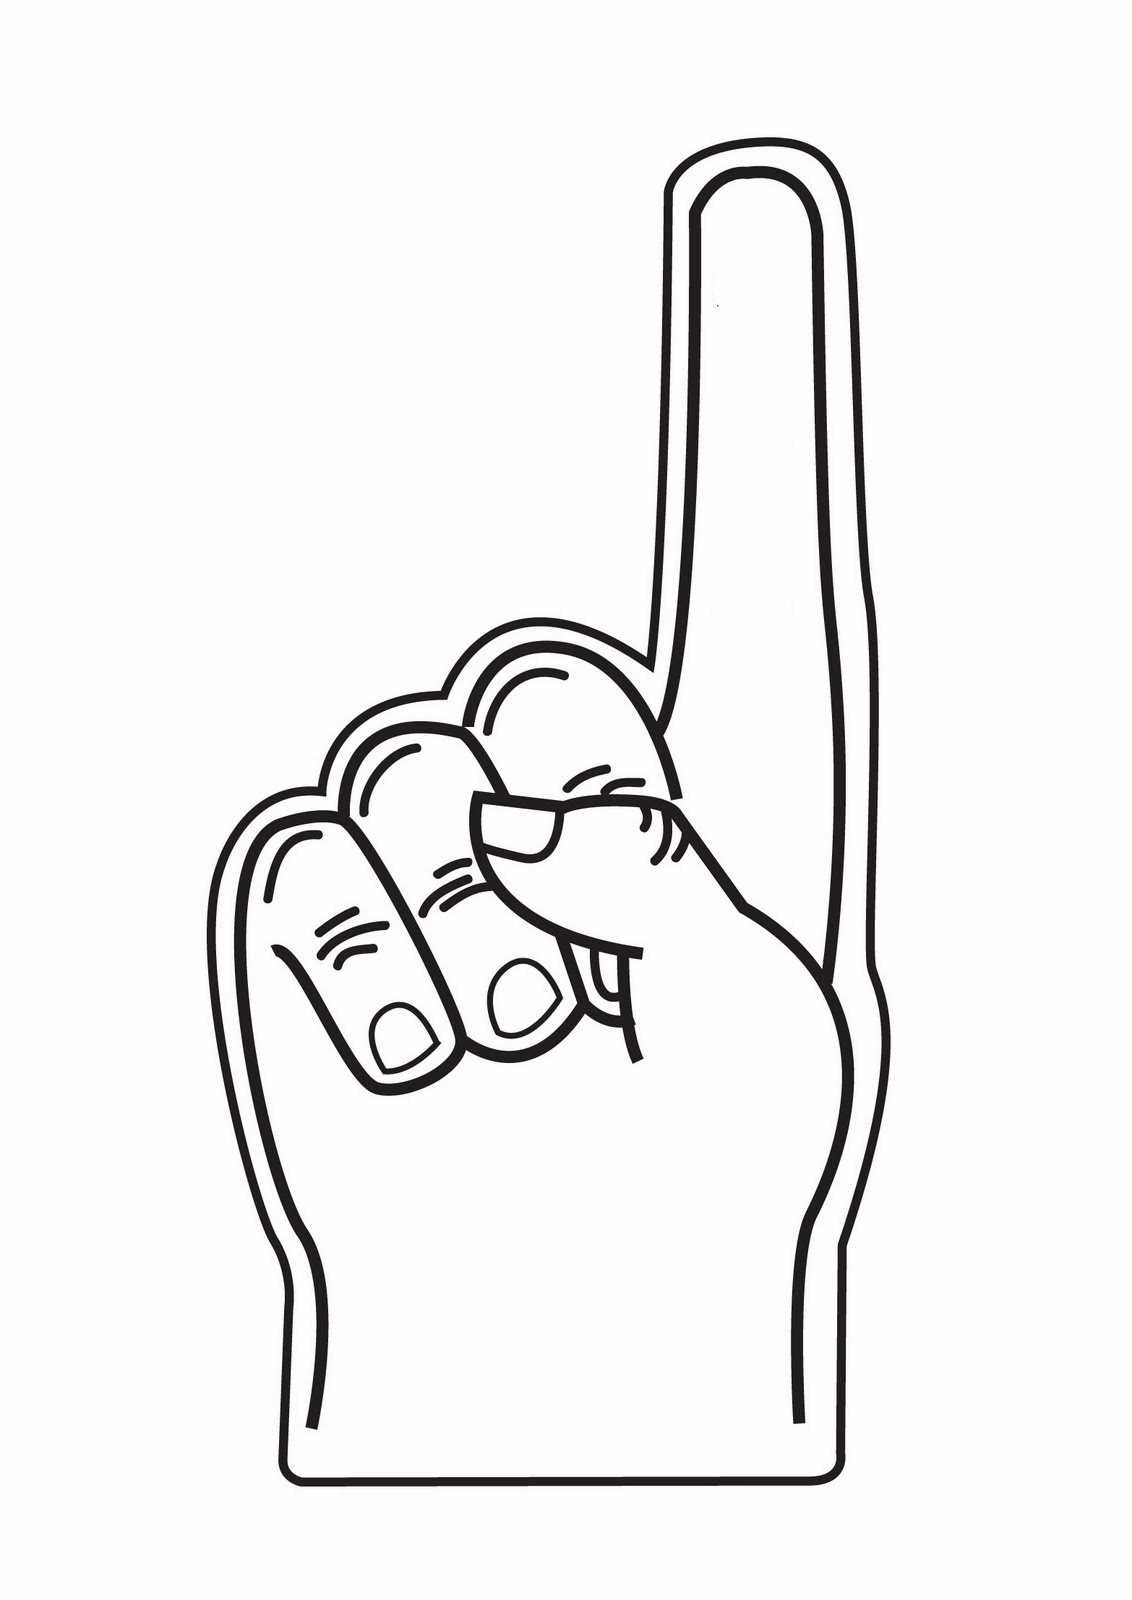 Picture Of Index Finger - ClipArt Best